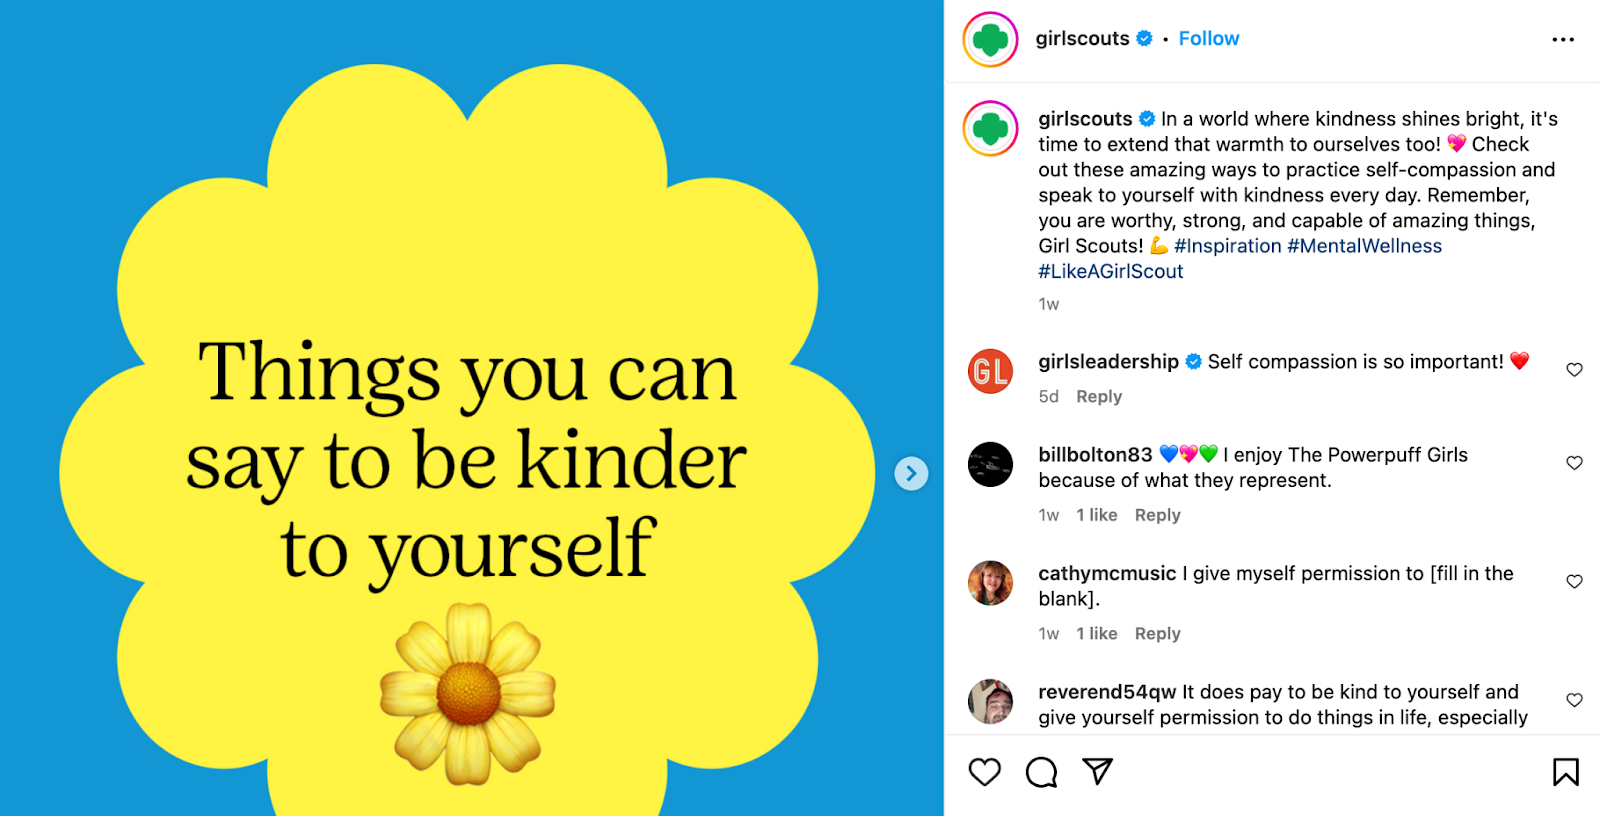 Girl Scouts insta post about kindness